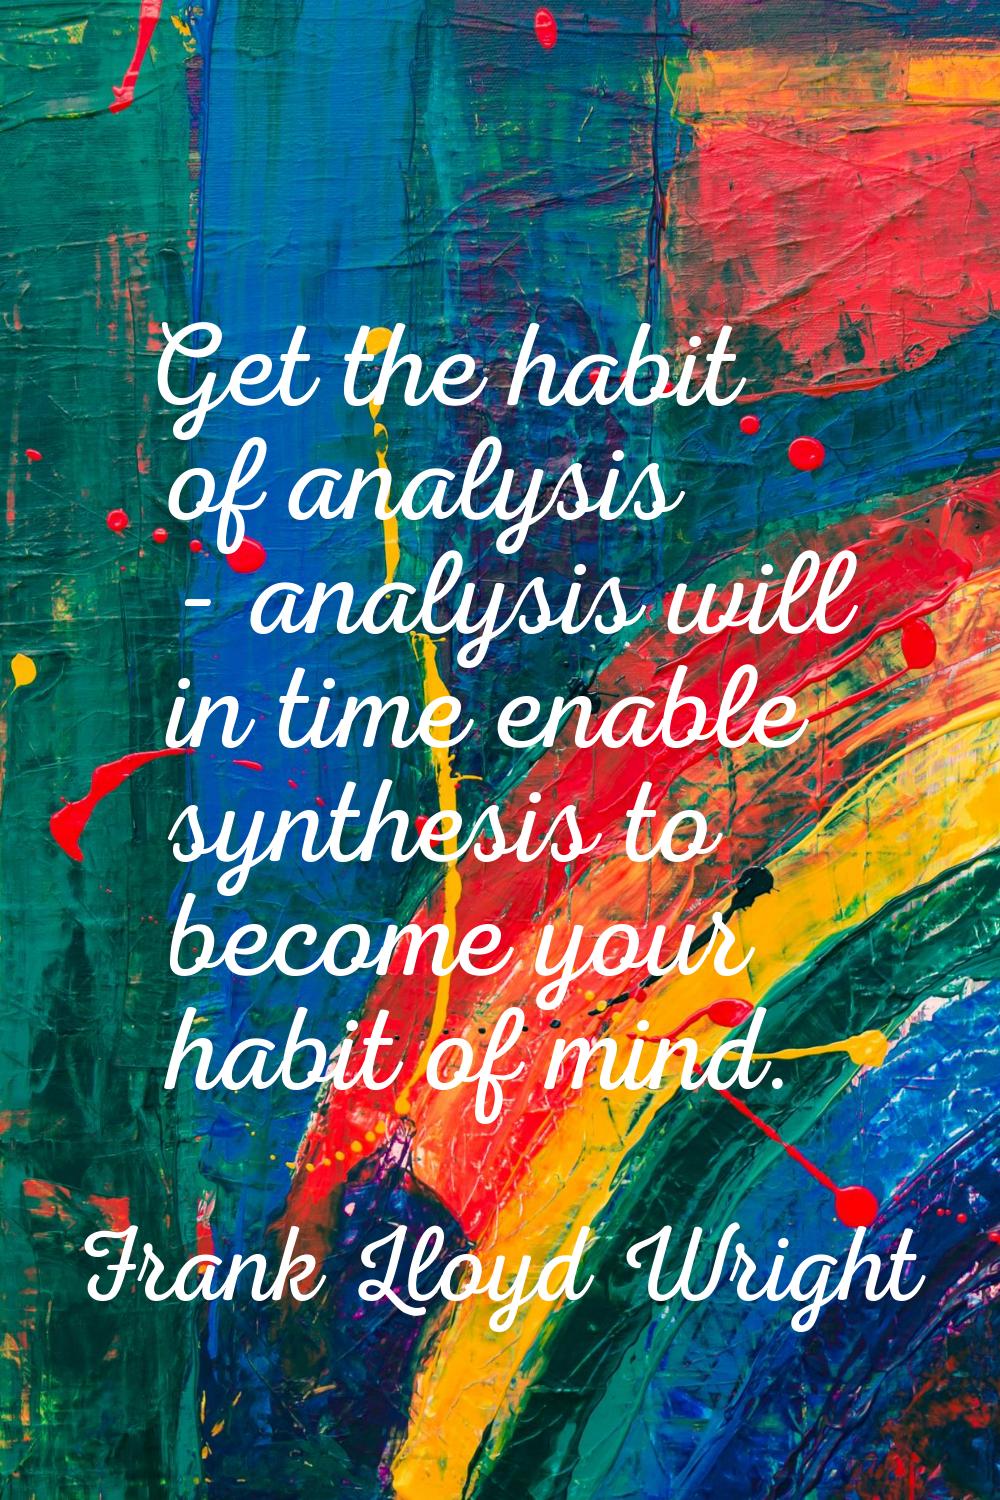 Get the habit of analysis - analysis will in time enable synthesis to become your habit of mind.